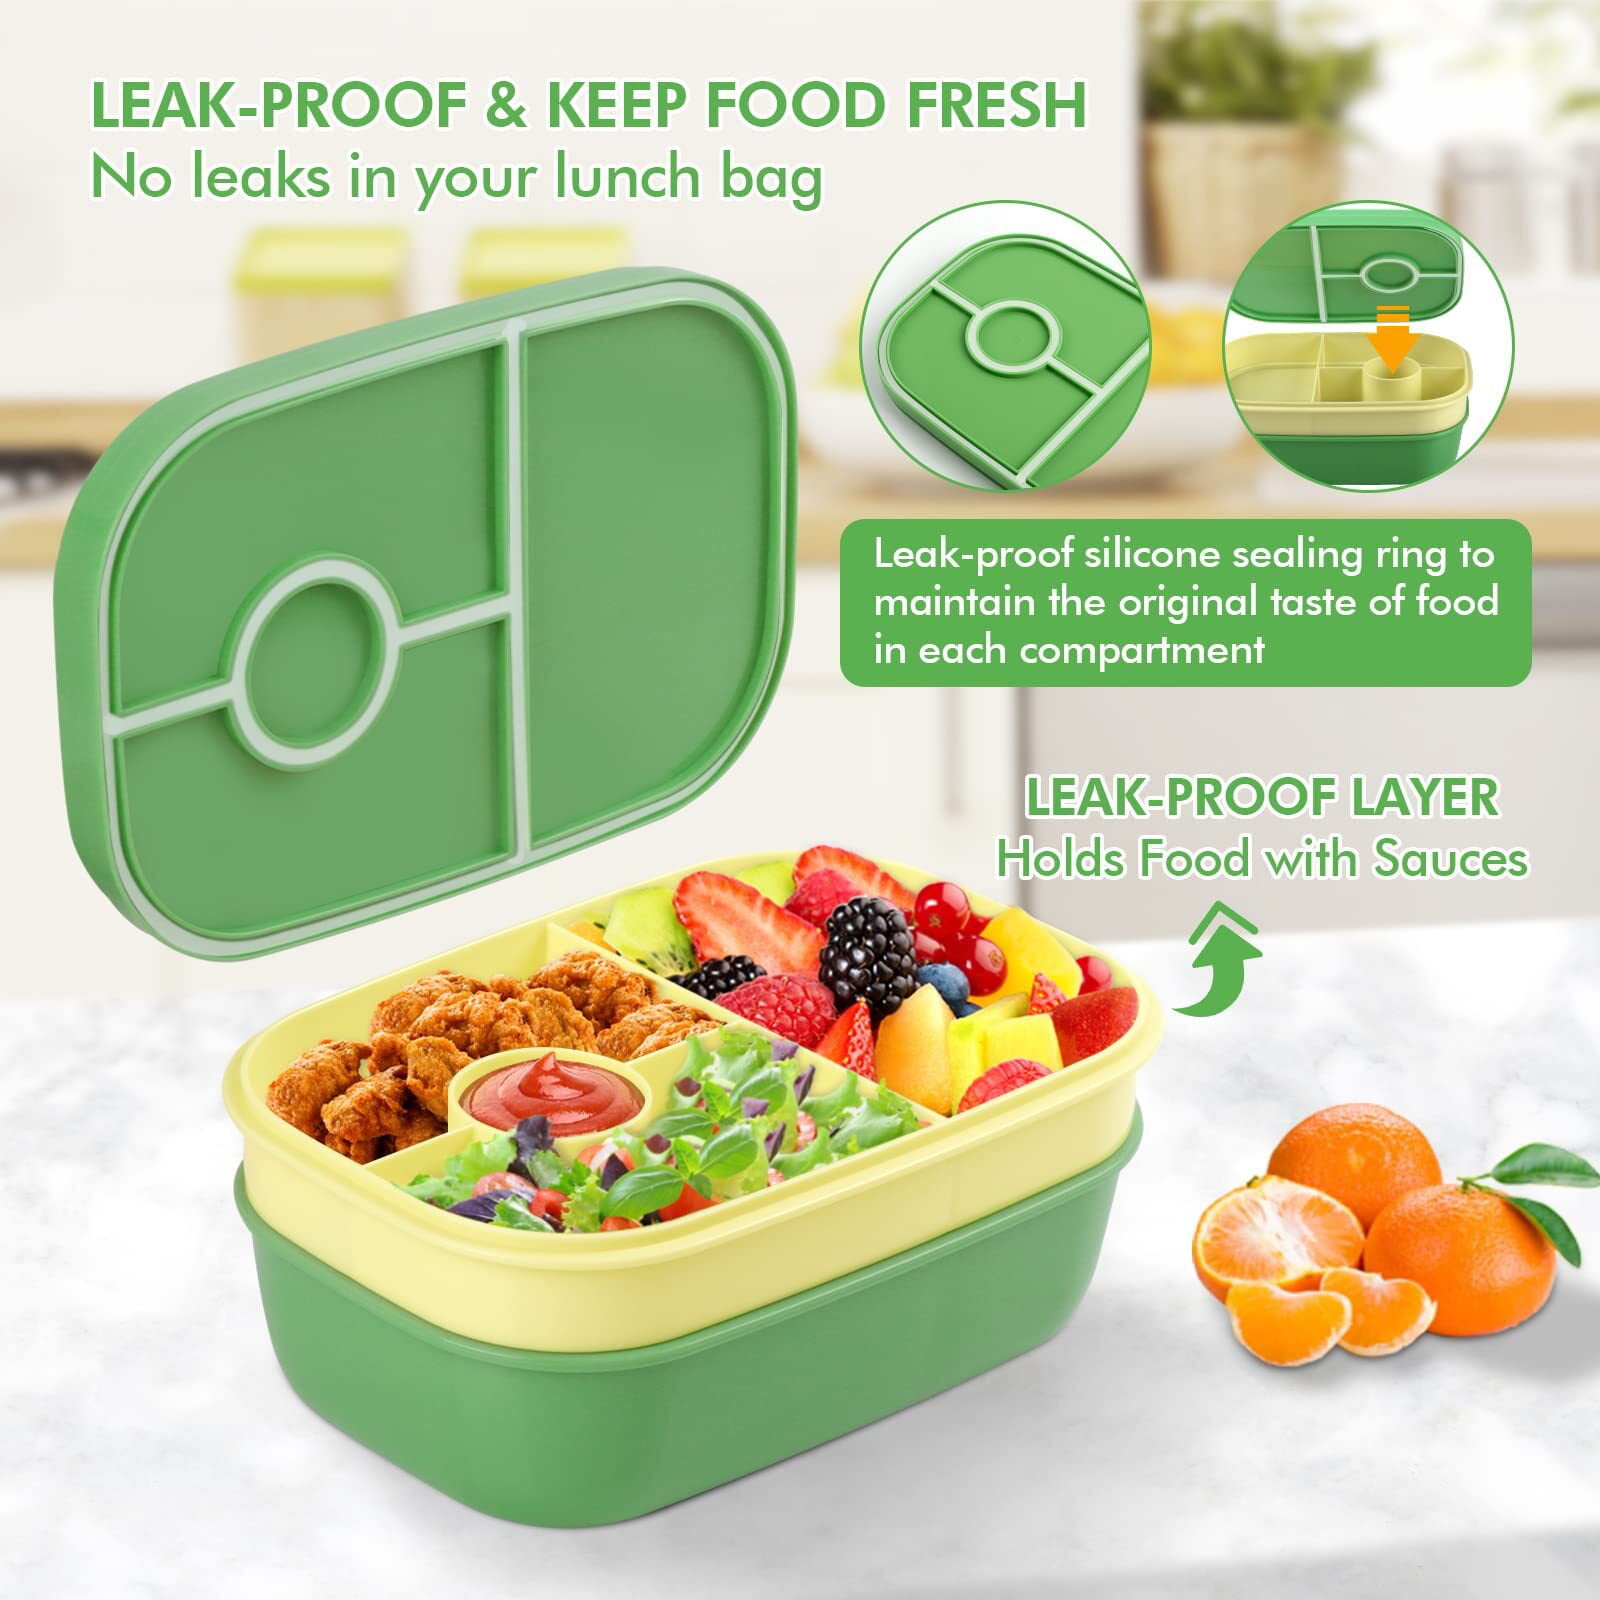  Caperci Stackable Bento Box Adult Lunch Box - 3 Layers  All-in-One Lunch Containers with Multiple Compartments for Adults & Kids,  55 oz Large Capacity, Built-in Utensil Set & BPA Free (Green)